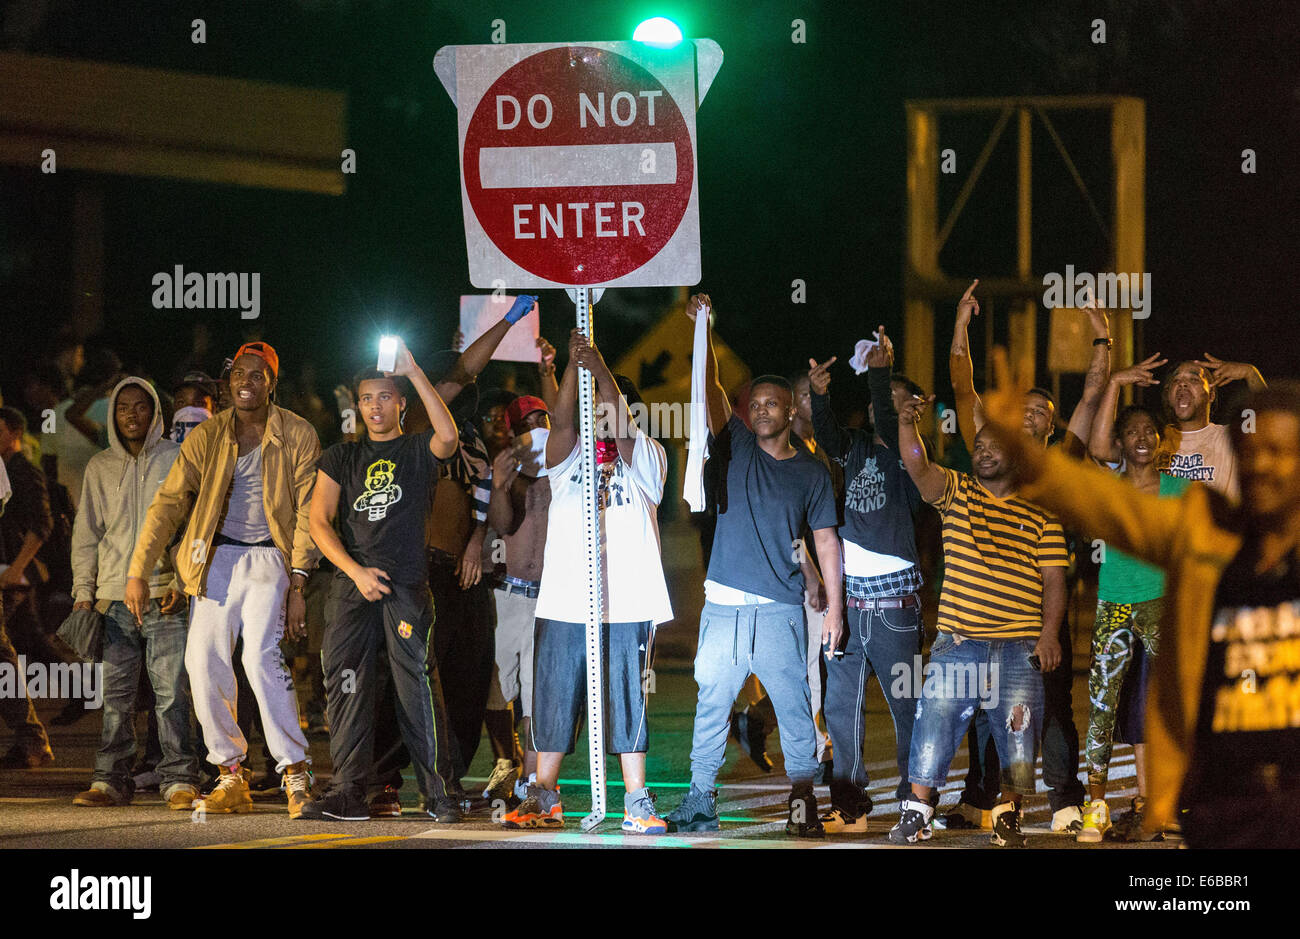 Ferguson, USA. 18th Aug, 2014. Protestors carrying broken street signs block the road during protests against police killing of Michael Brown in Ferguson, Missouri, the United States, around midnight of Aug. 18, 2014. On Aug. 9, 18-year-old African American Michael Brown was shot dead by police in Ferguson, sparking continuous protests in the town where most of the population is black. Credit:  Shen Ting/Xinhua/Alamy Live News Stock Photo